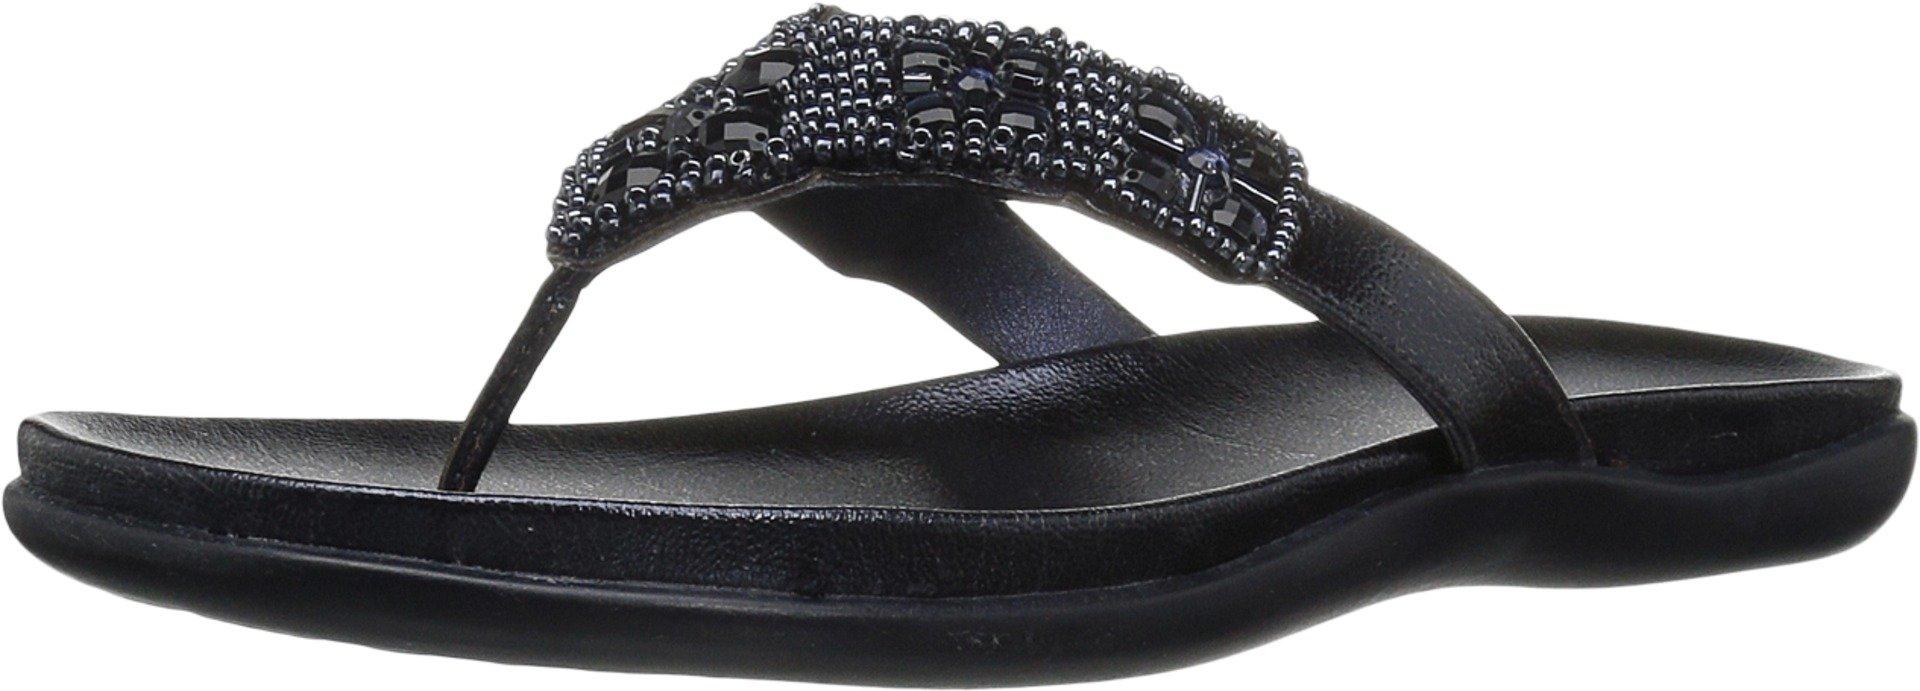 Kenneth Cole Reaction Glam-athon Thong Sandal in Midnight (Blue) - Lyst